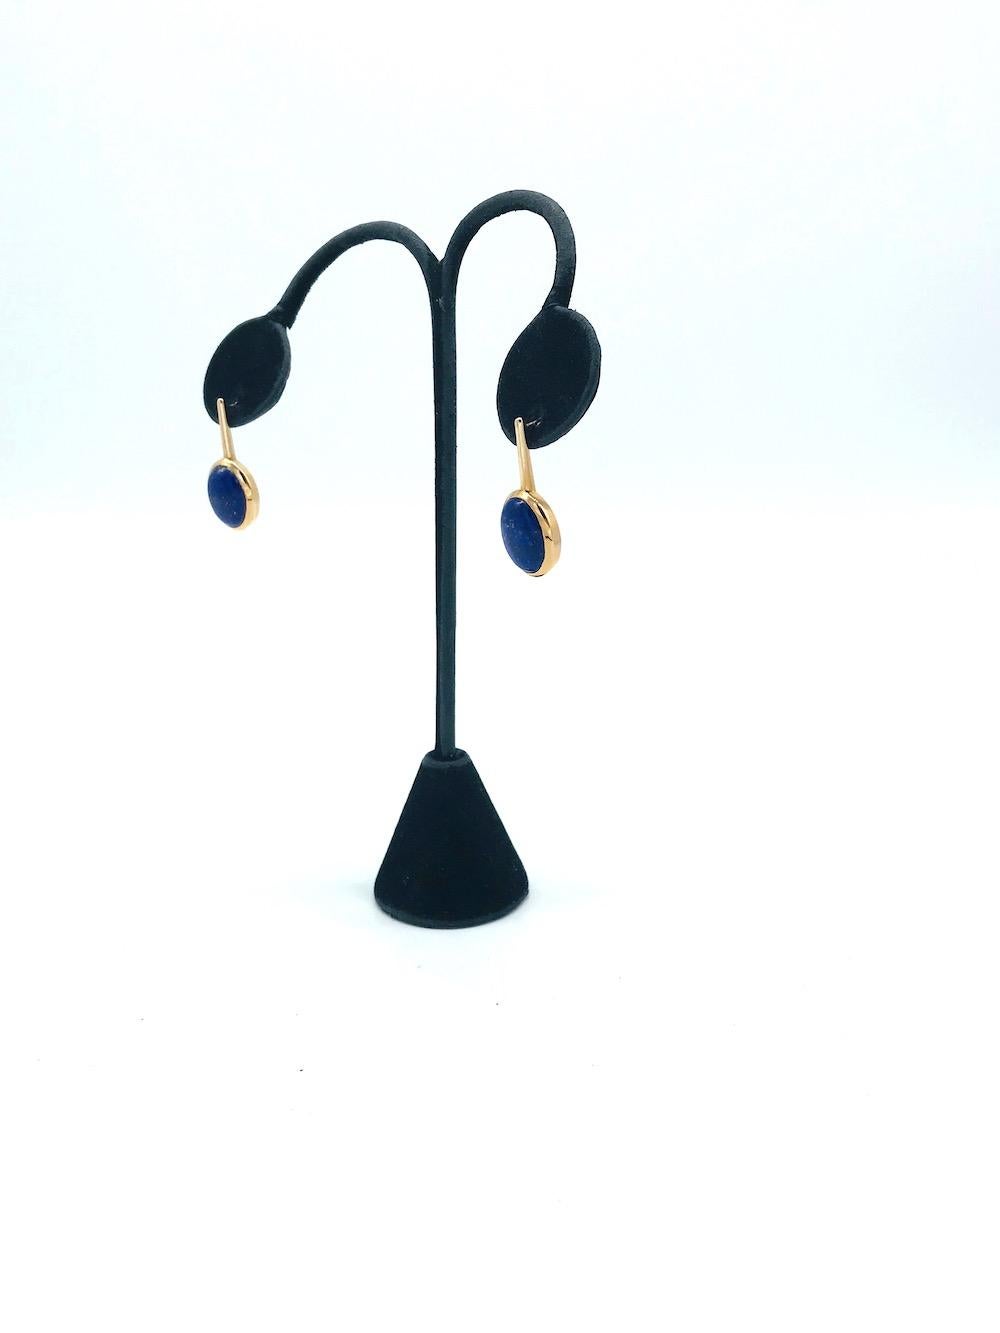 Blue Lapis Lazuli, 1 Inch Bezel Dangle Earring Customized, 14 Kit yellow gold bezels measuring 14 x 11.85 mm wide 
Post and nut for pierced ears.
Quality settings;  5.5 grams weight of gold
GIA Gemologist inspected and evaluated